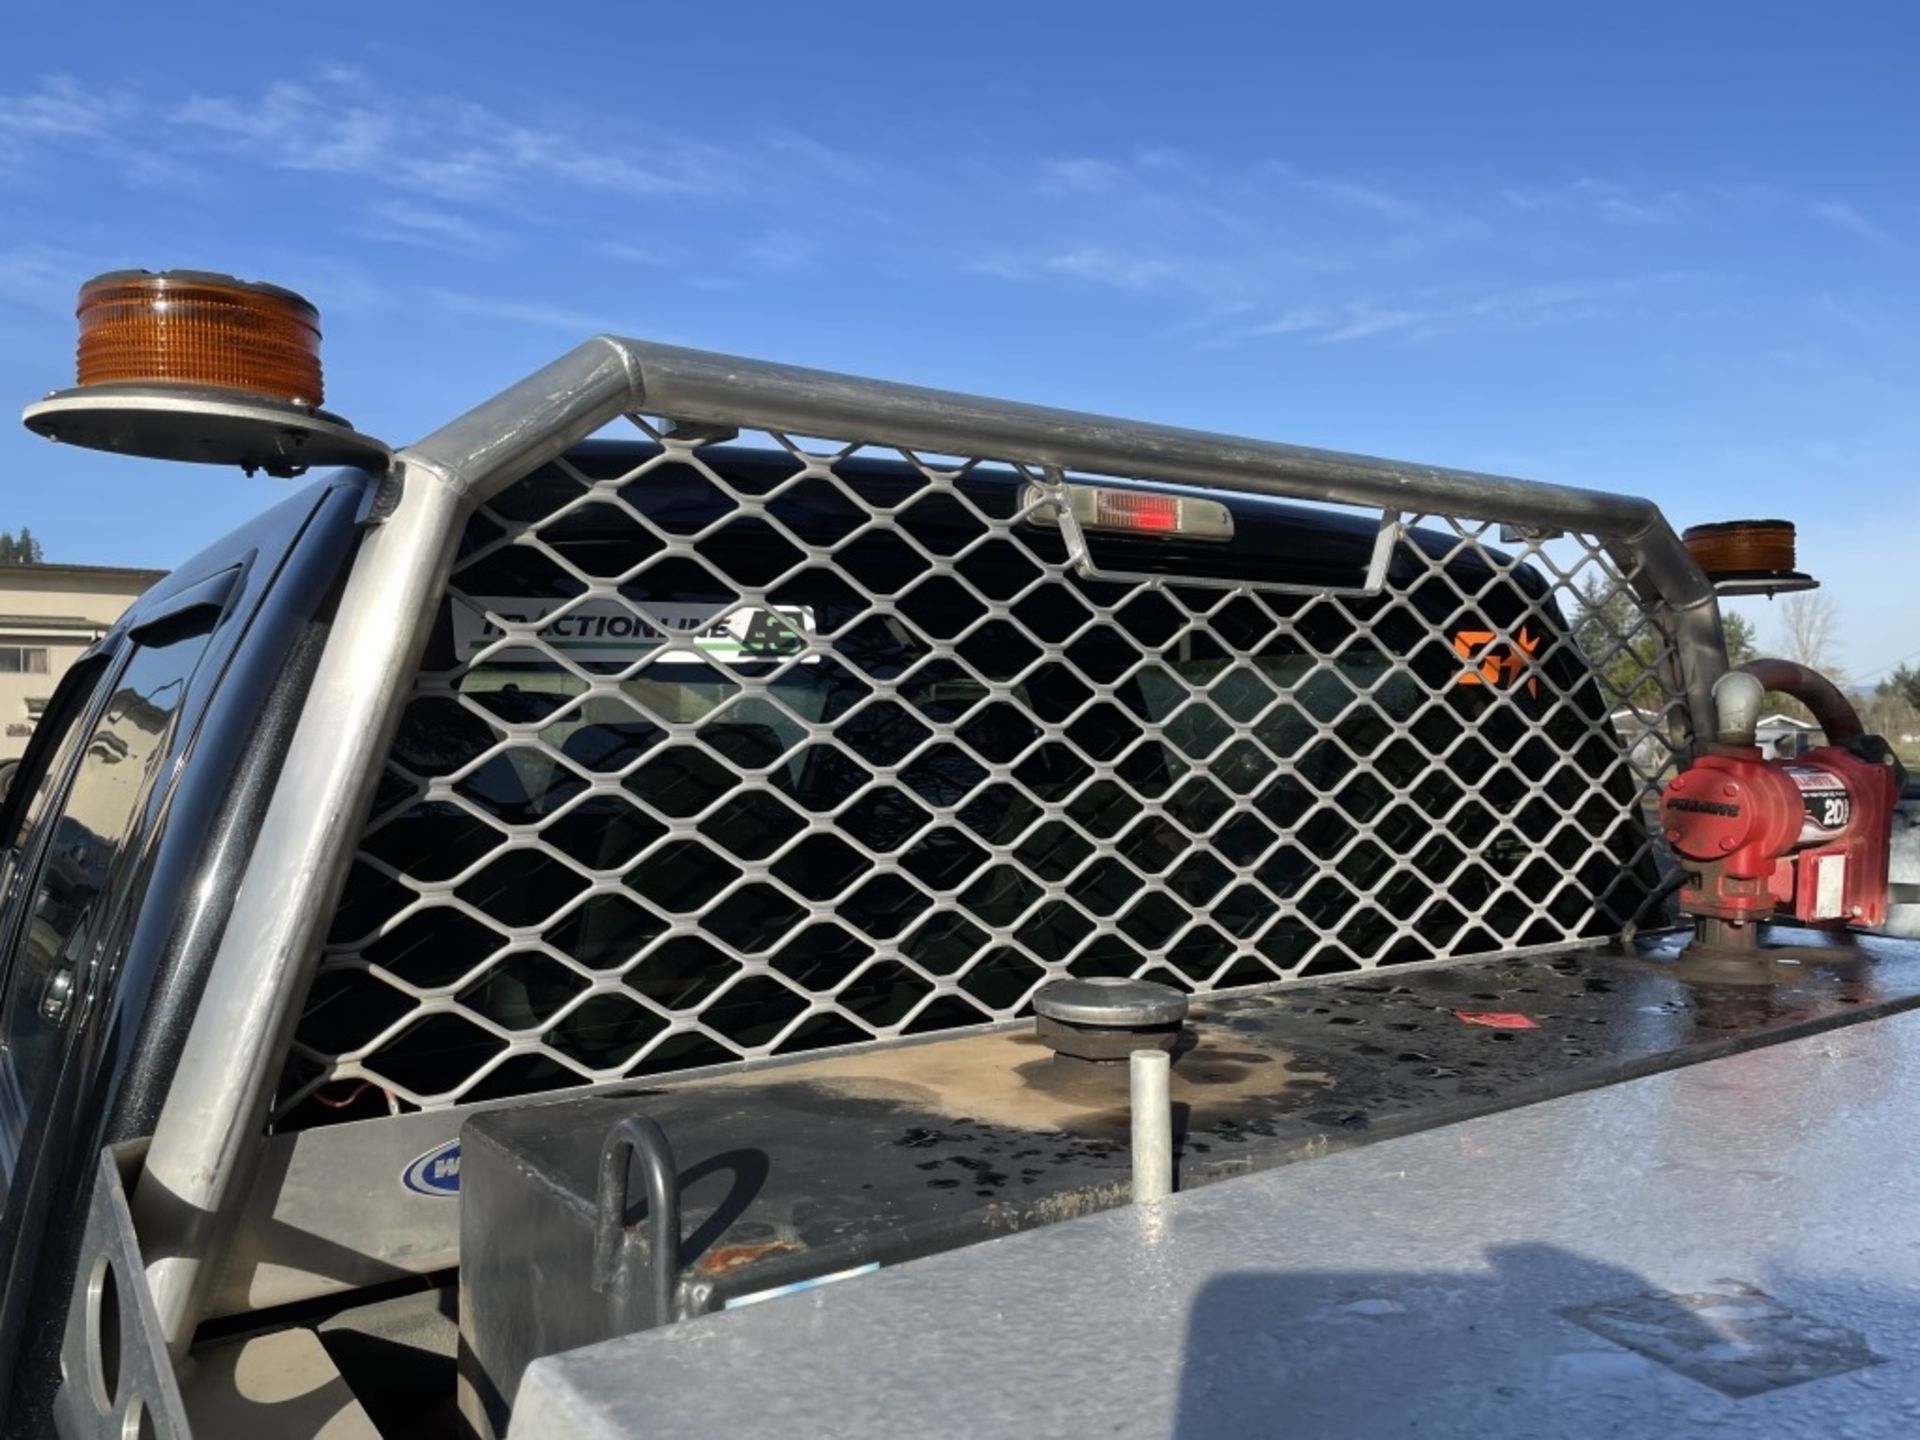 2015 Ford F350 XL SD 4x4 Crew Cab Pickup - Image 8 of 24